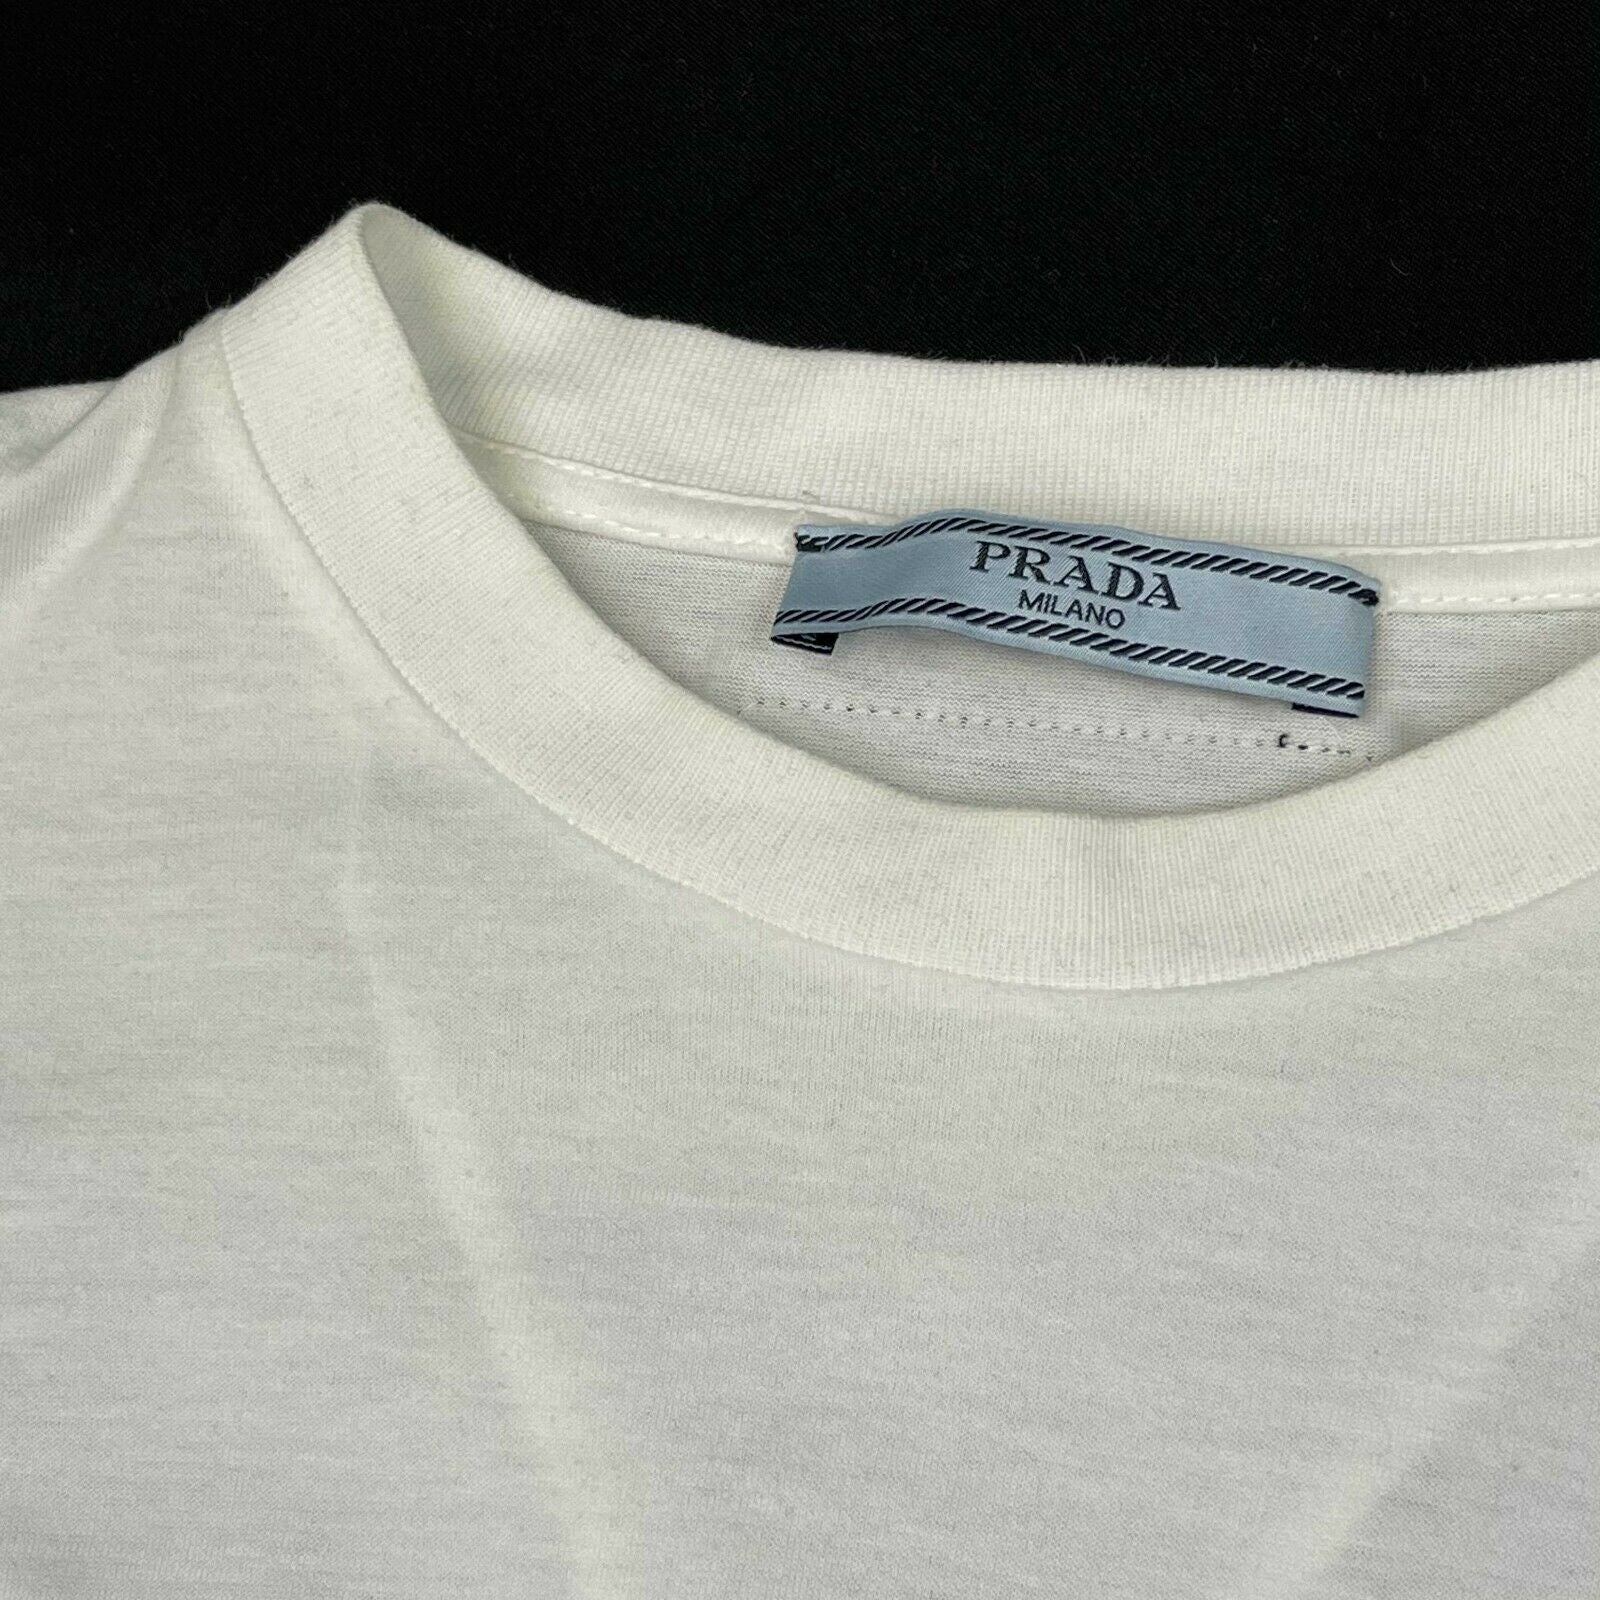 Prada - White T-Shirt with Rubber Patch Logo on Back at Top - Size Men -  BougieHabit